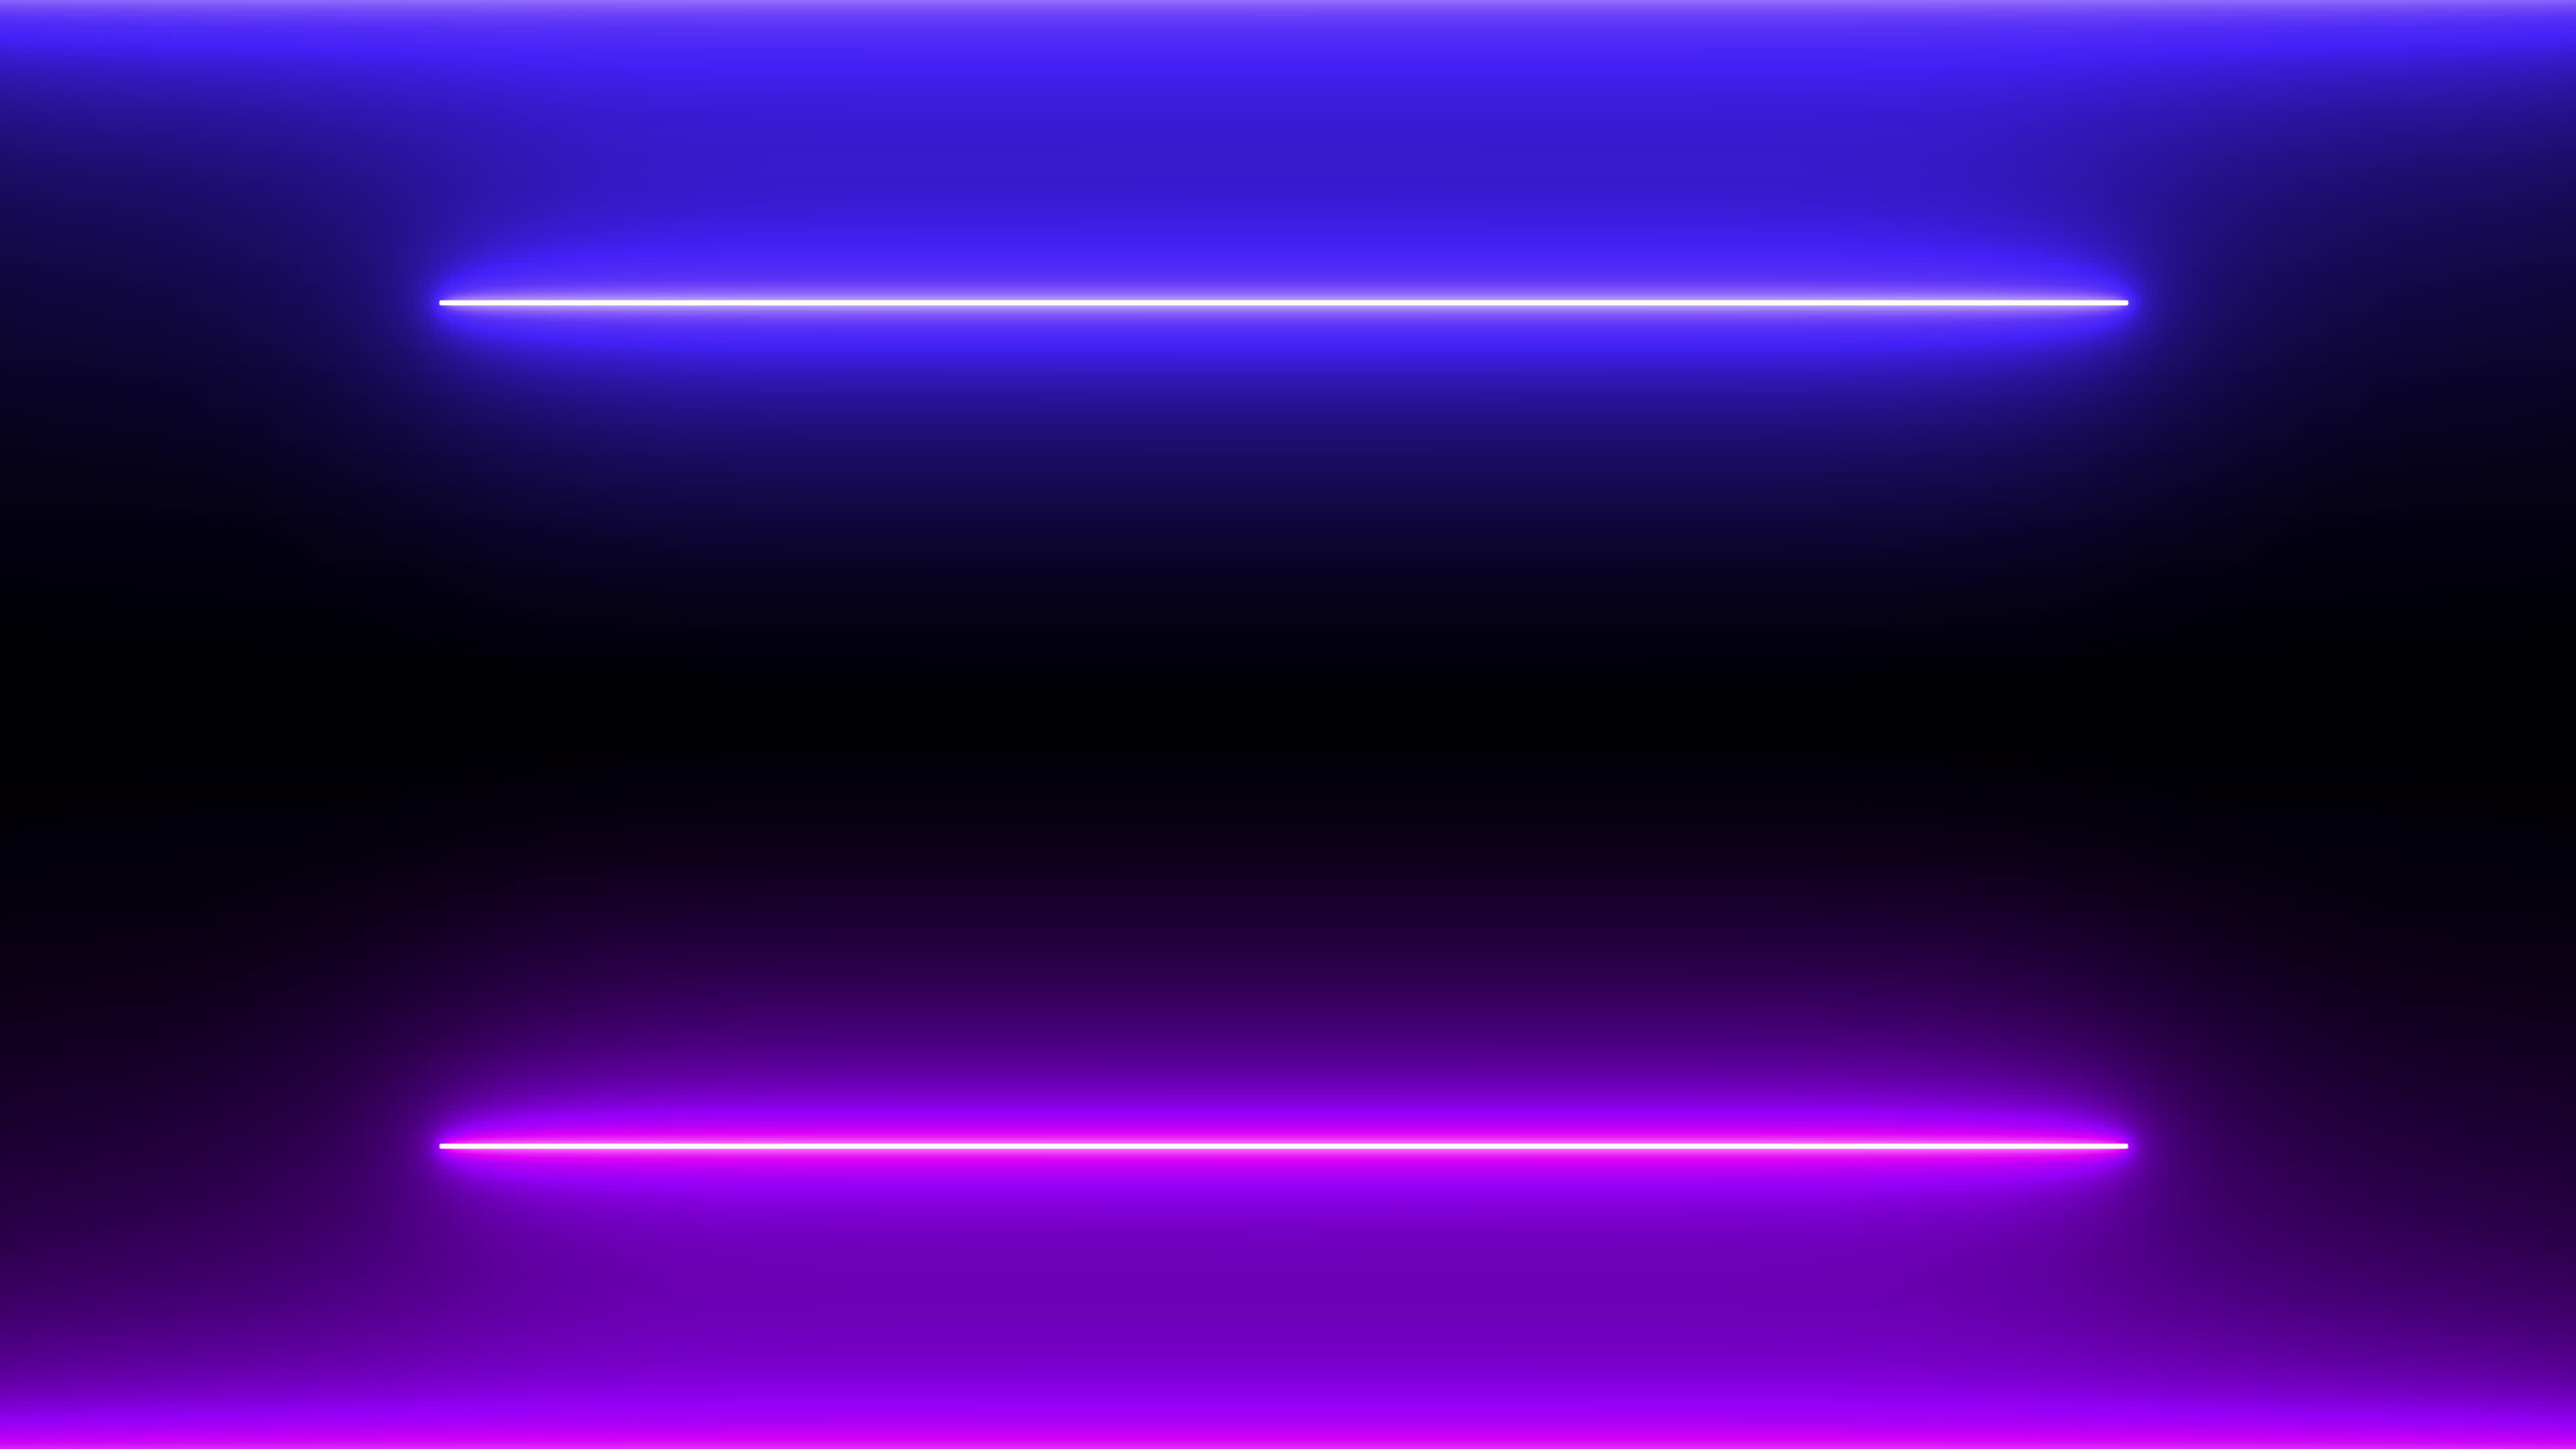 graphic fluorescent horizontal perspective neon room floor abstract  wallpaper, light space illustration 3d render, cyber club electronic game,  glowing illumination laser cool Illusion shape 10728388 Stock Video at  Vecteezy